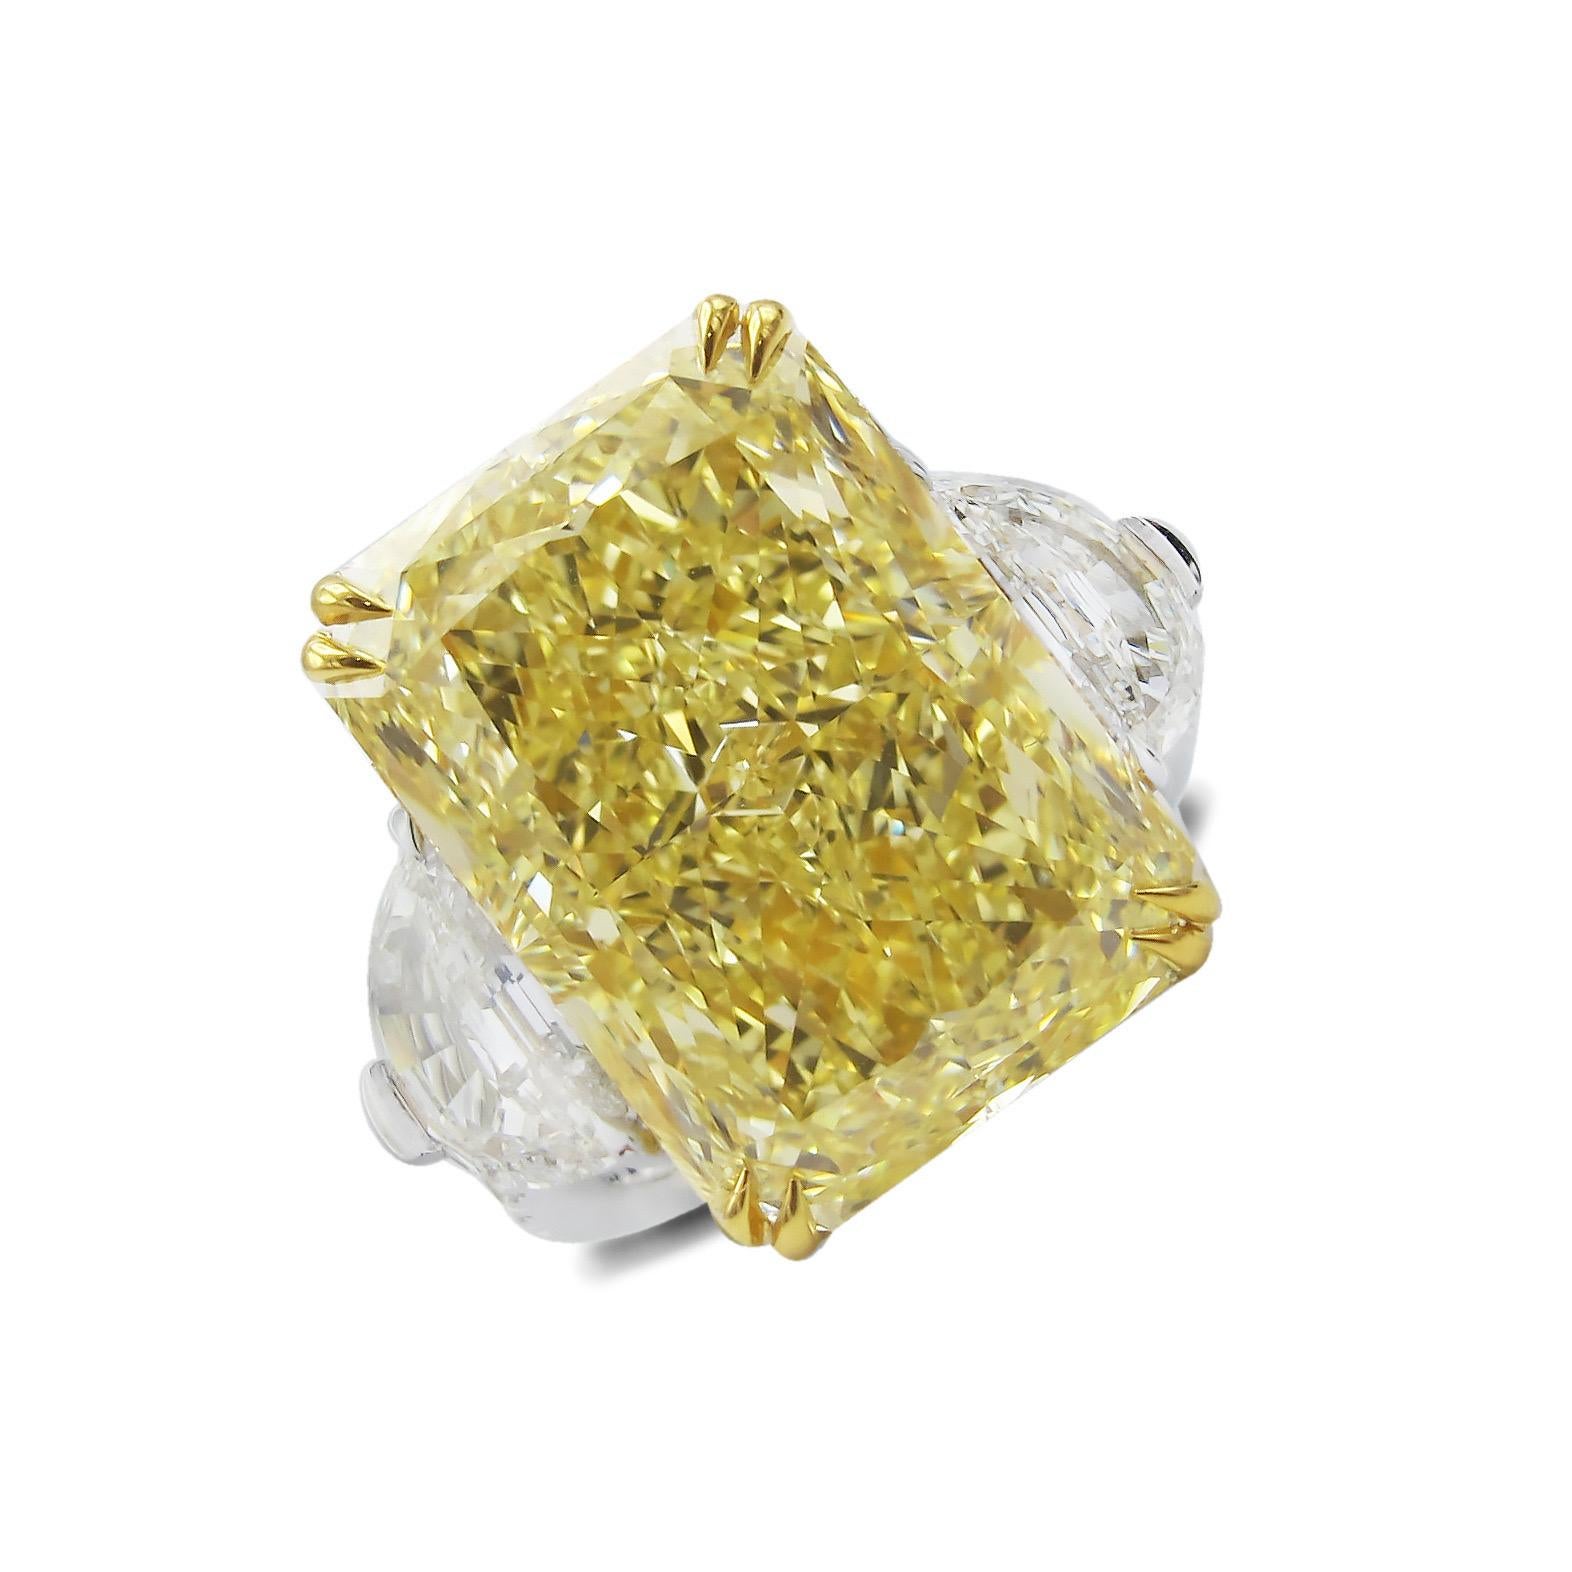 From The Museum Vault at Emilio Jewelry Located on New York's iconic Fifth Avenue,
Showcasing a very special and rare Gia certified natural fancy intense yellow radiant set in the center. This is a very unique diamond not only because of its superb